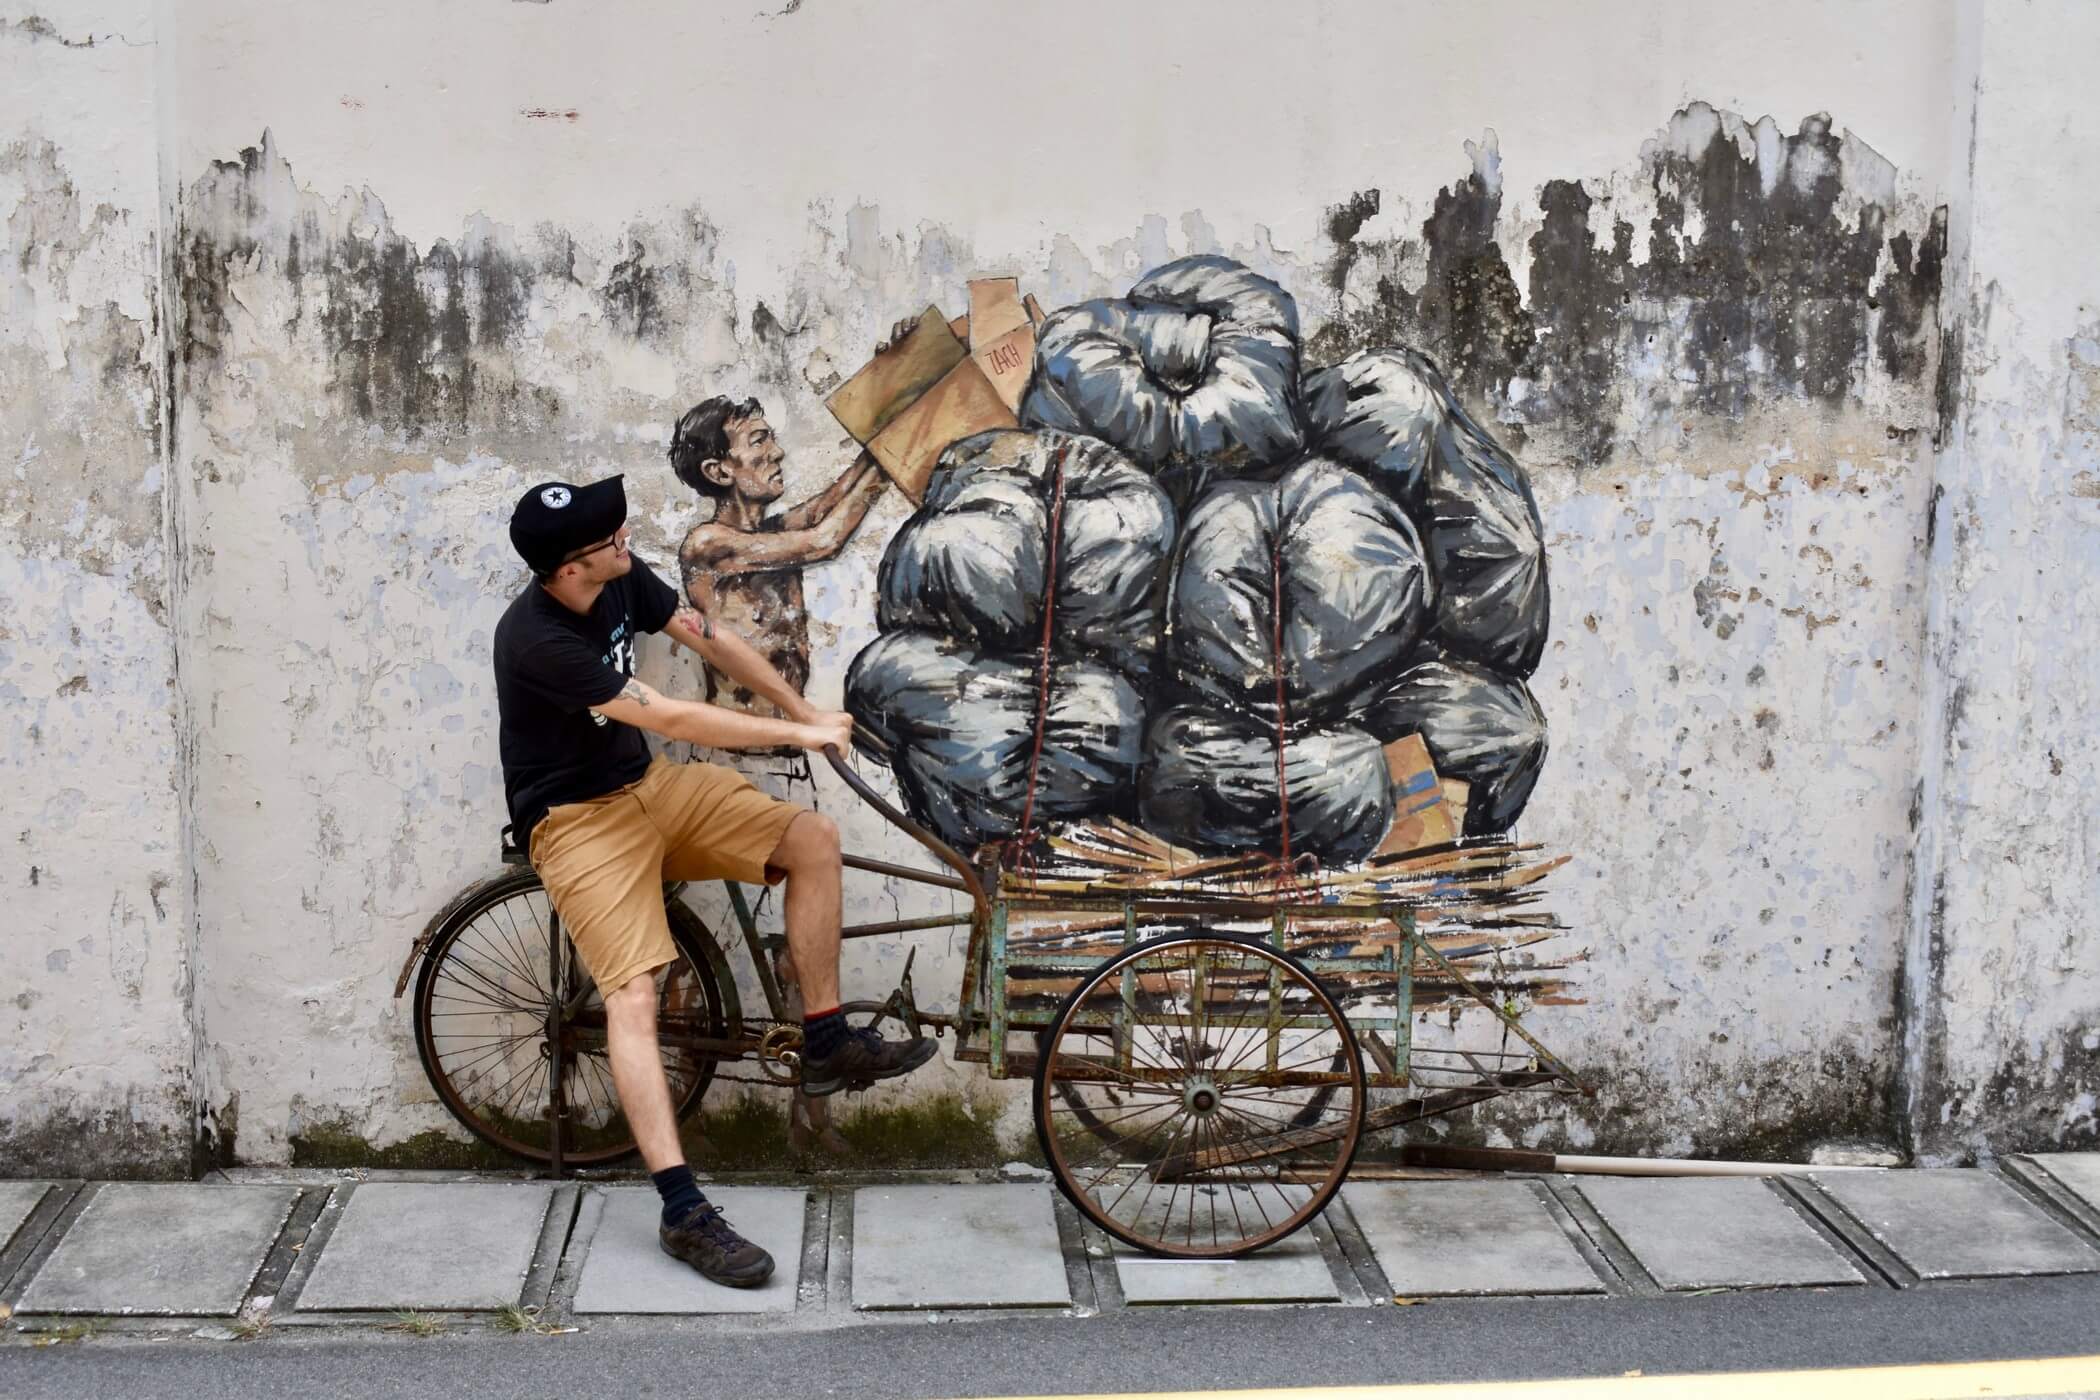 Three days in Ipoh